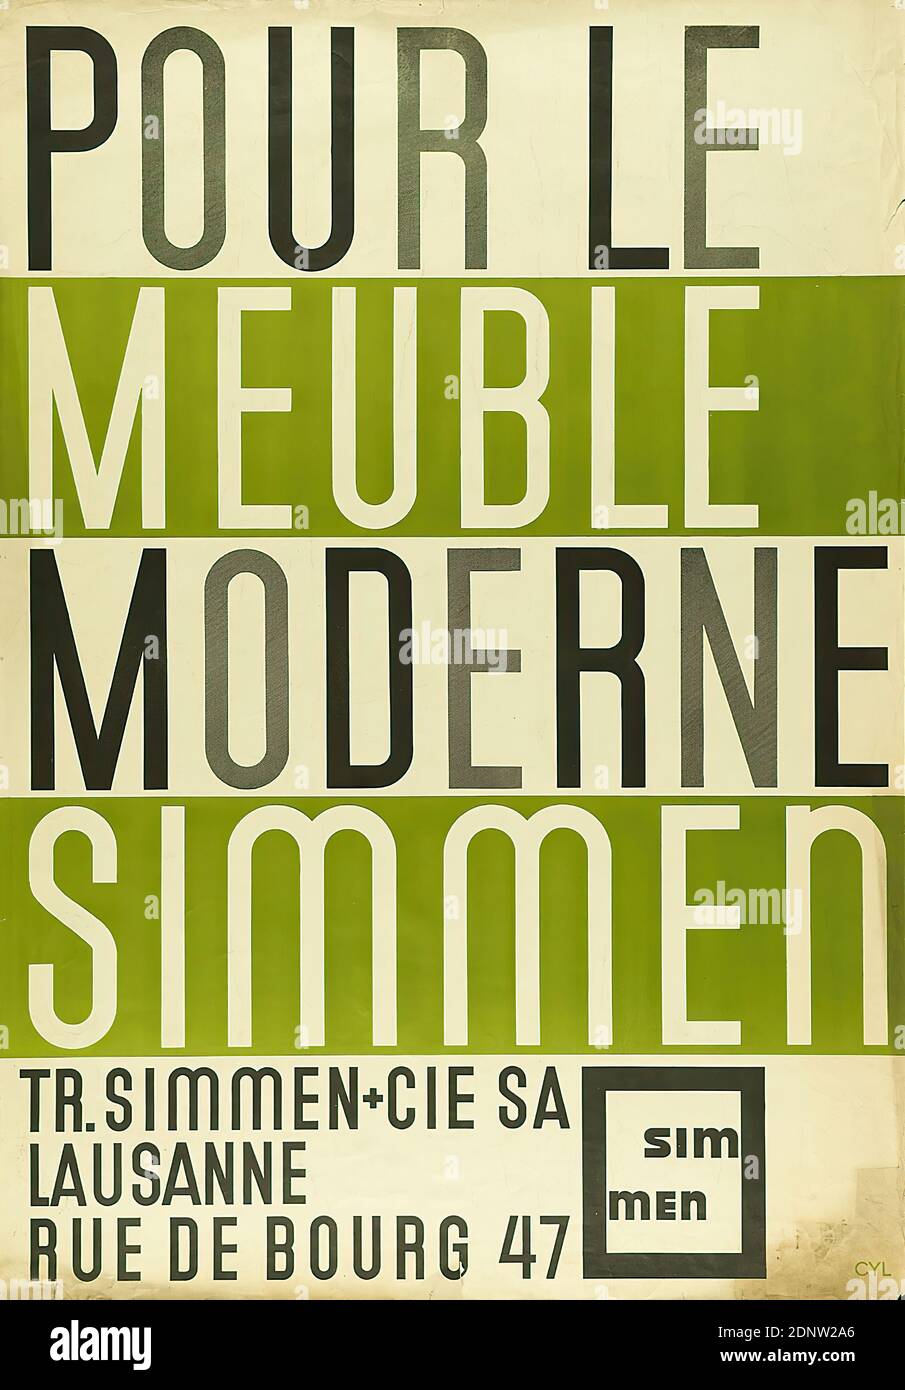 Walter Cyliax, Gebr. Fretz Graph. Workshops, Pour le Meuble. Modernism. Simmen, lithography, Total: Height: 128.3 cm; Width: 90.2 cm, monogrammed: bottom right in print form: CYL, product and business advertising (posters), letters, alphabet, type Stock Photo